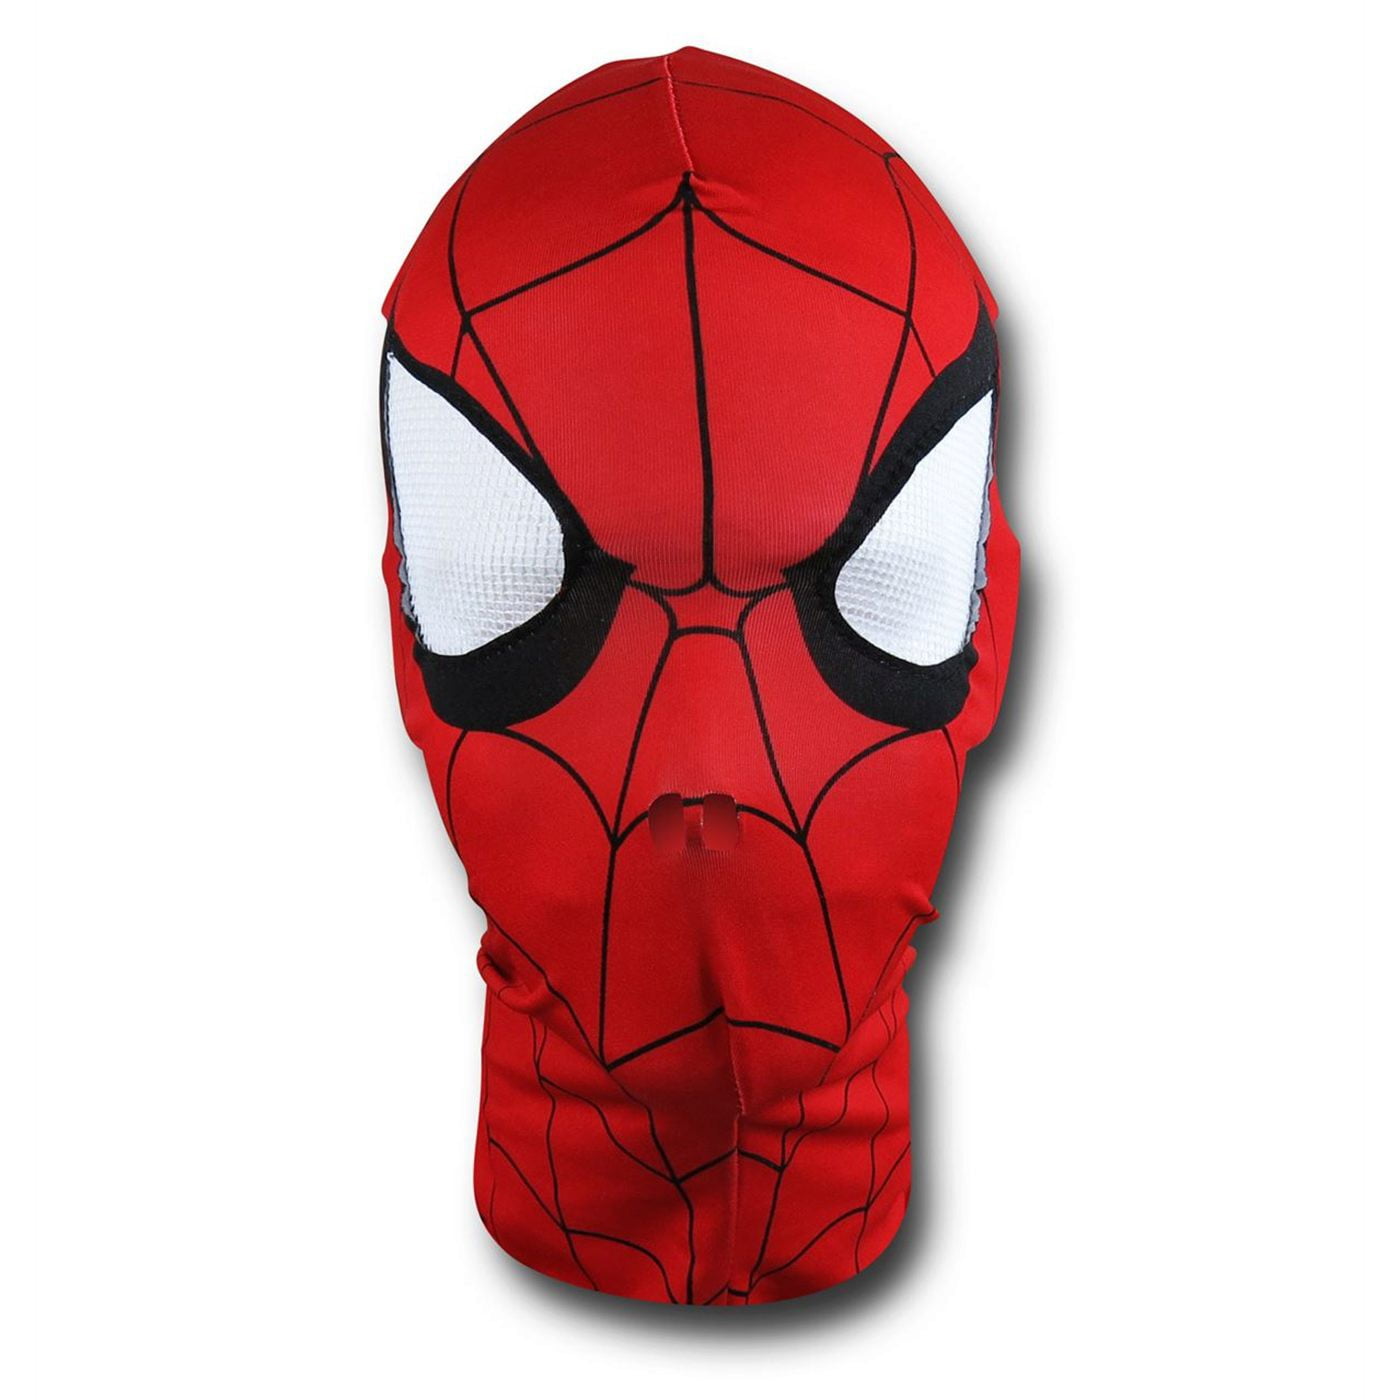 Spider-Man Multi-color Polyester Halloween Costume Mask, for Child